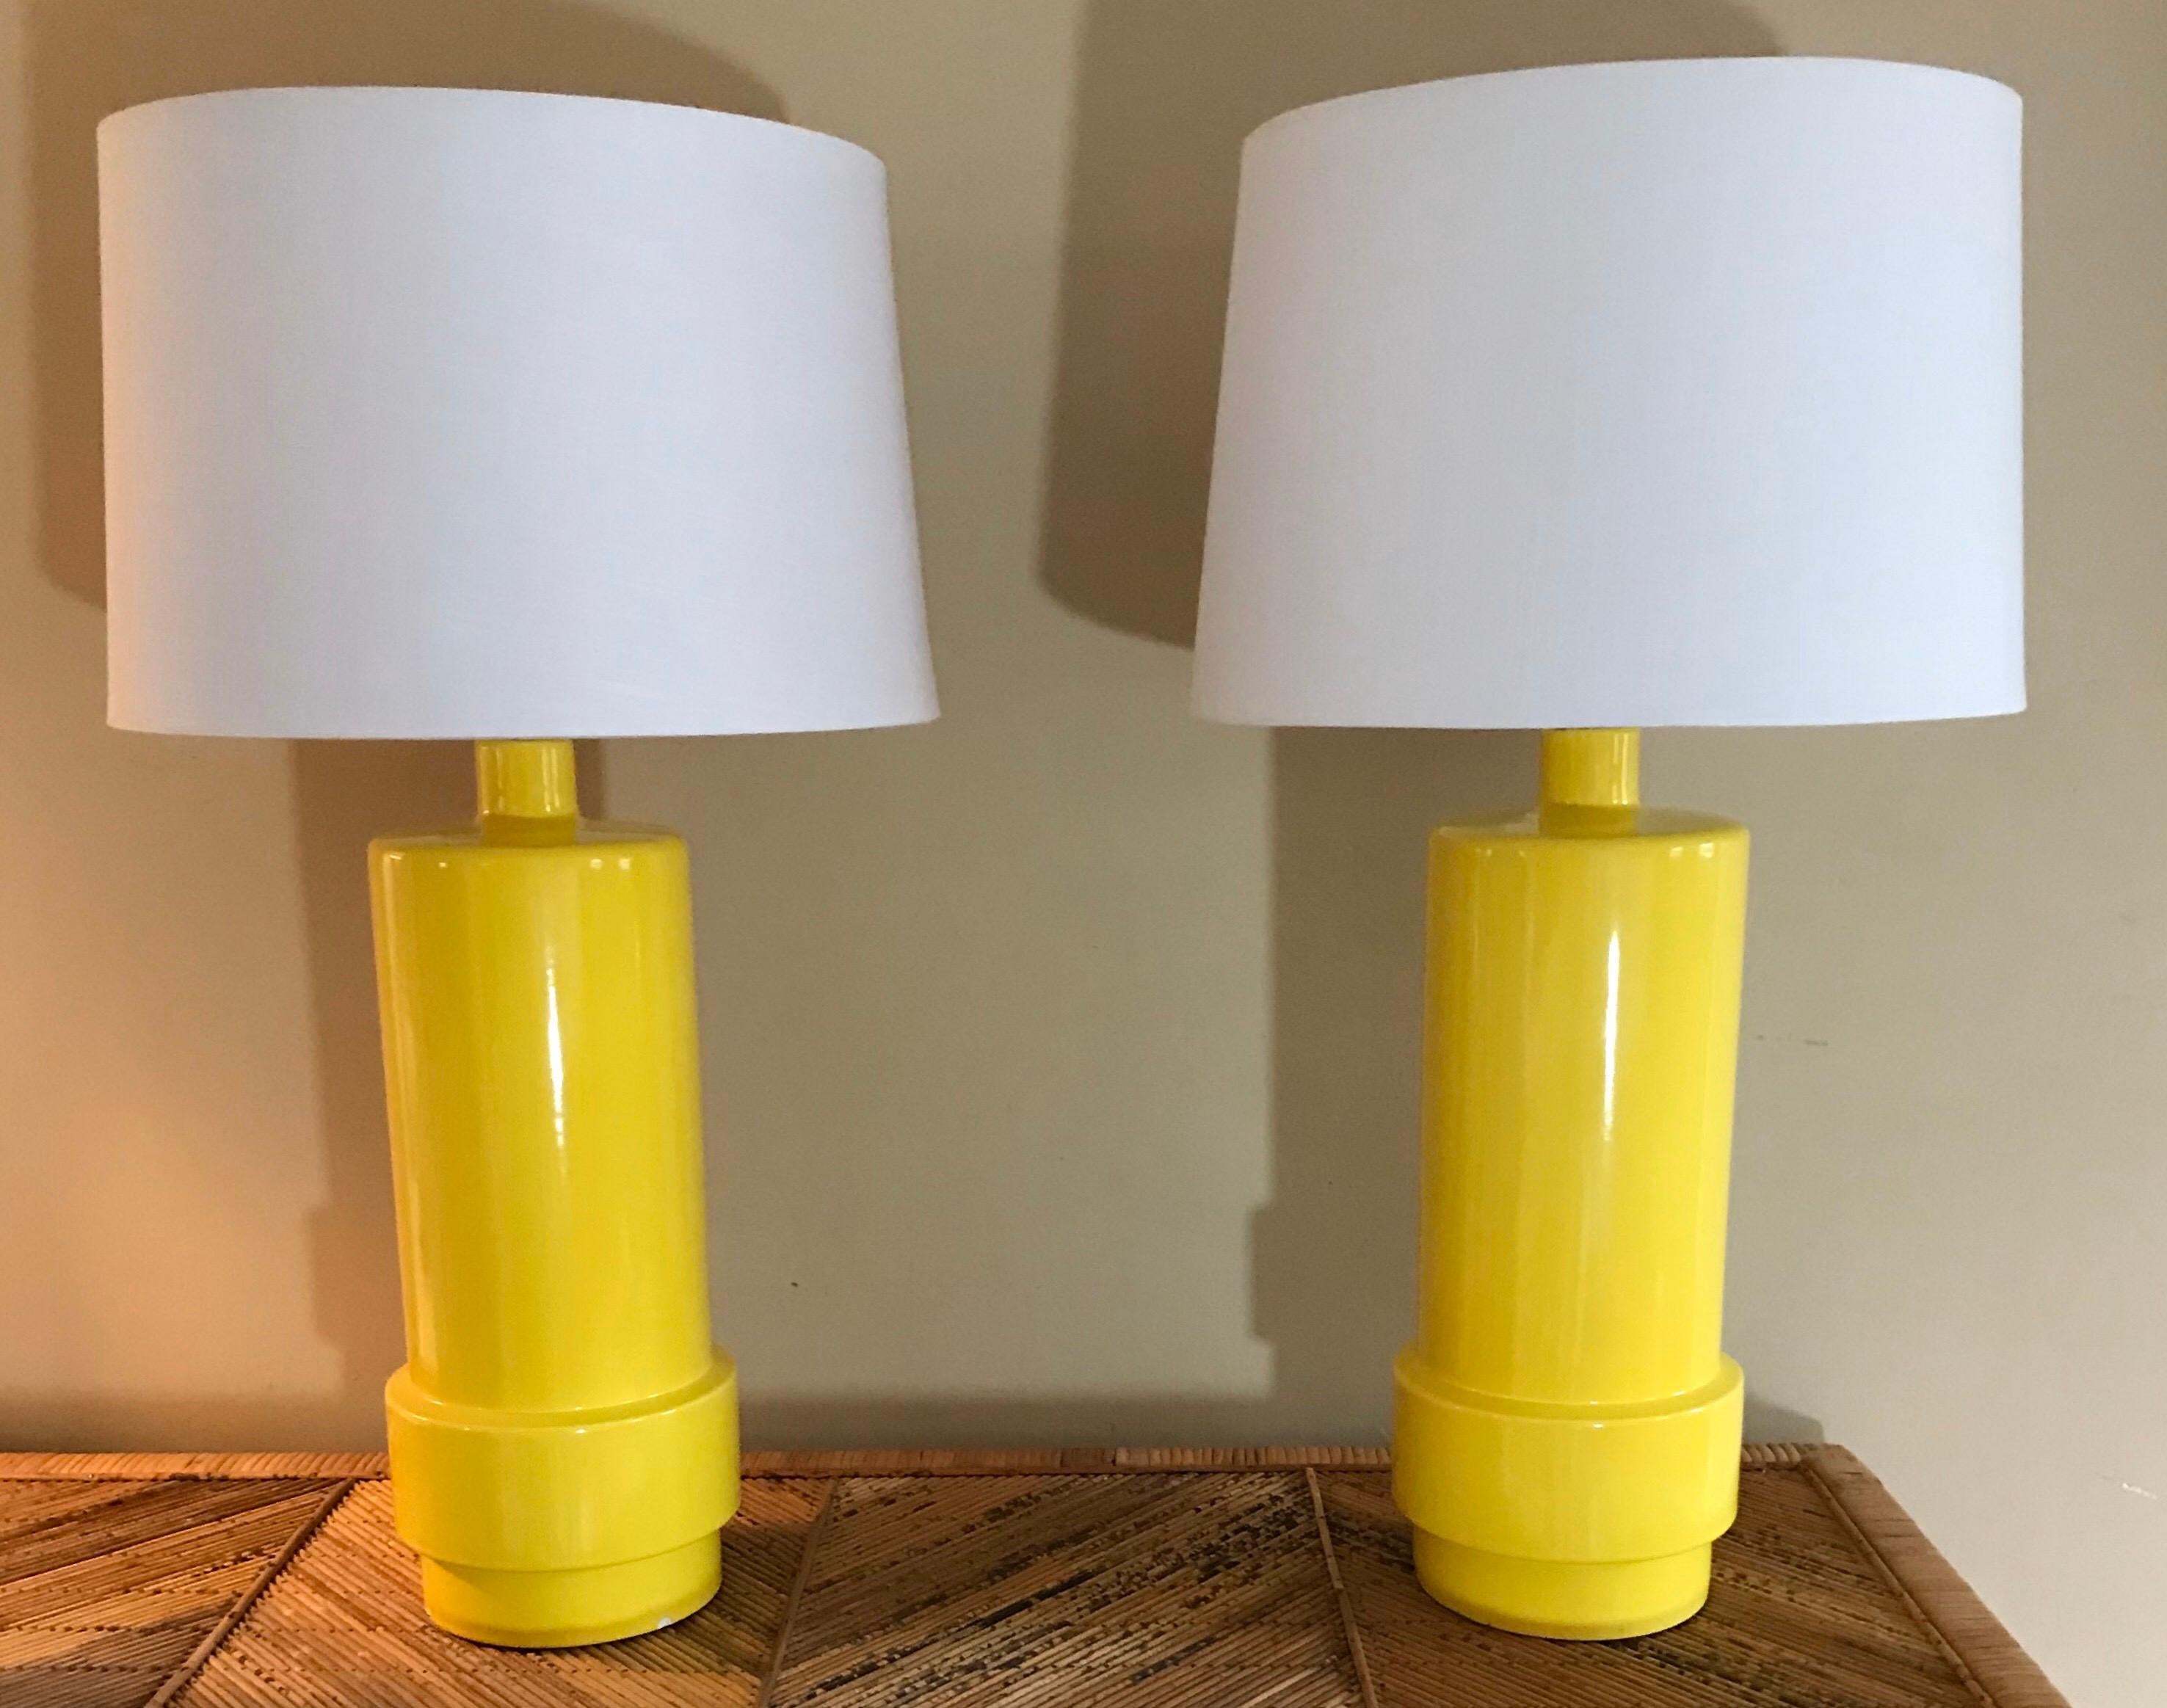 Huge! Gorgeous! The best vintage yellow lamps, ever.

New shades and glass globe finials. 

32.5 inches tall with current harp and finial- 24.5 inches to top of socket. 

